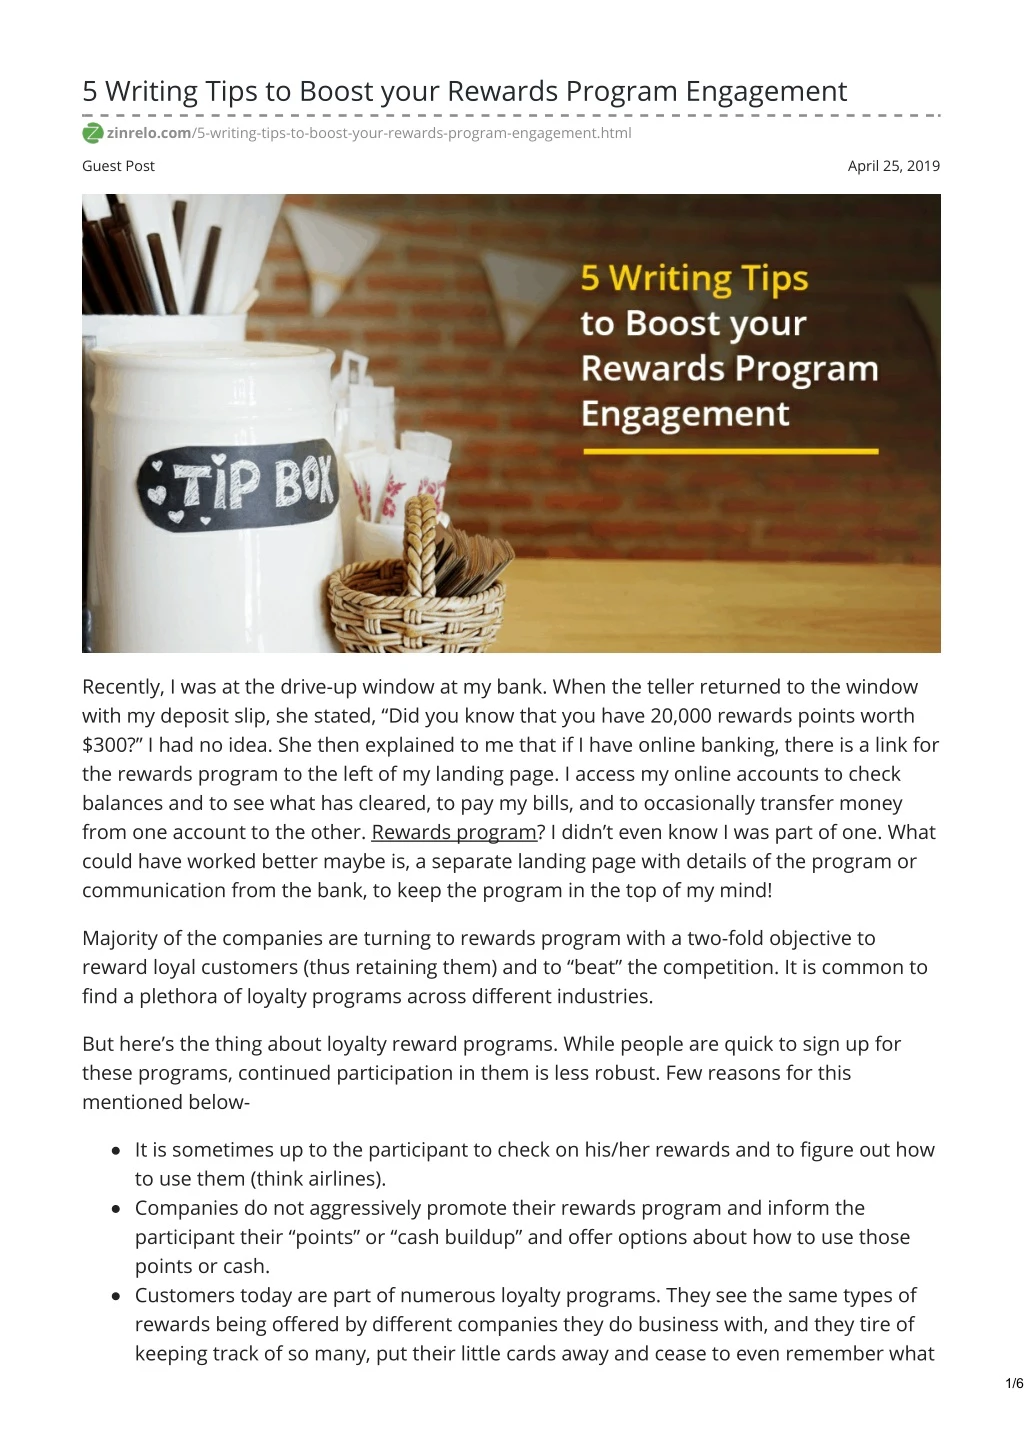 5 writing tips to boost your rewards program